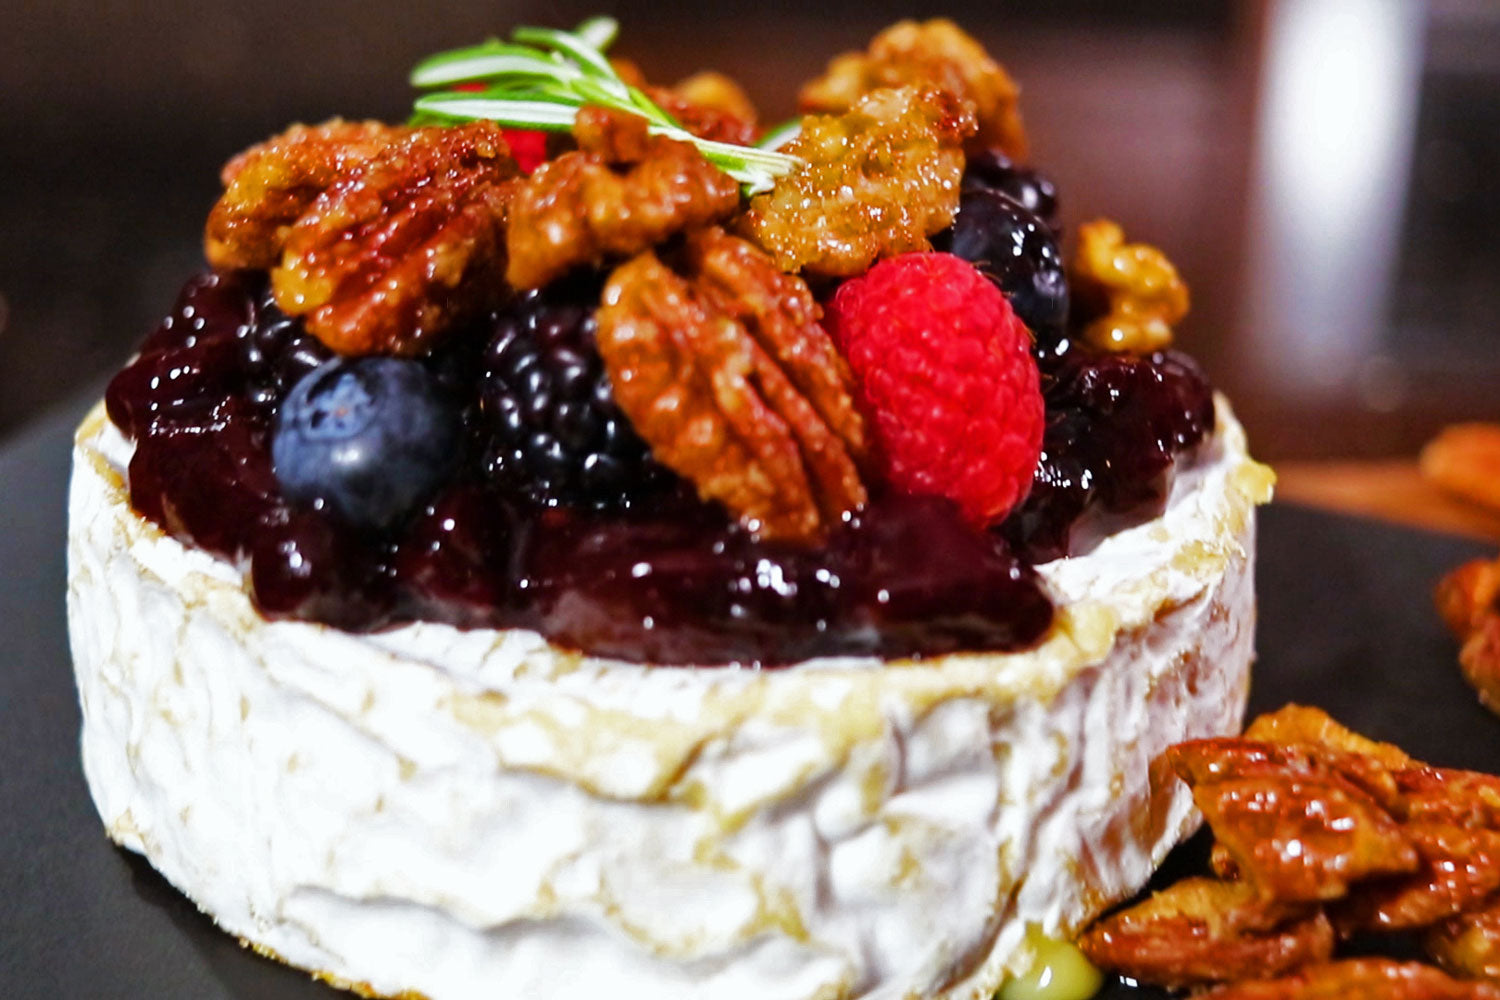 Baked Brie with Maple Candied Nuts and Berries